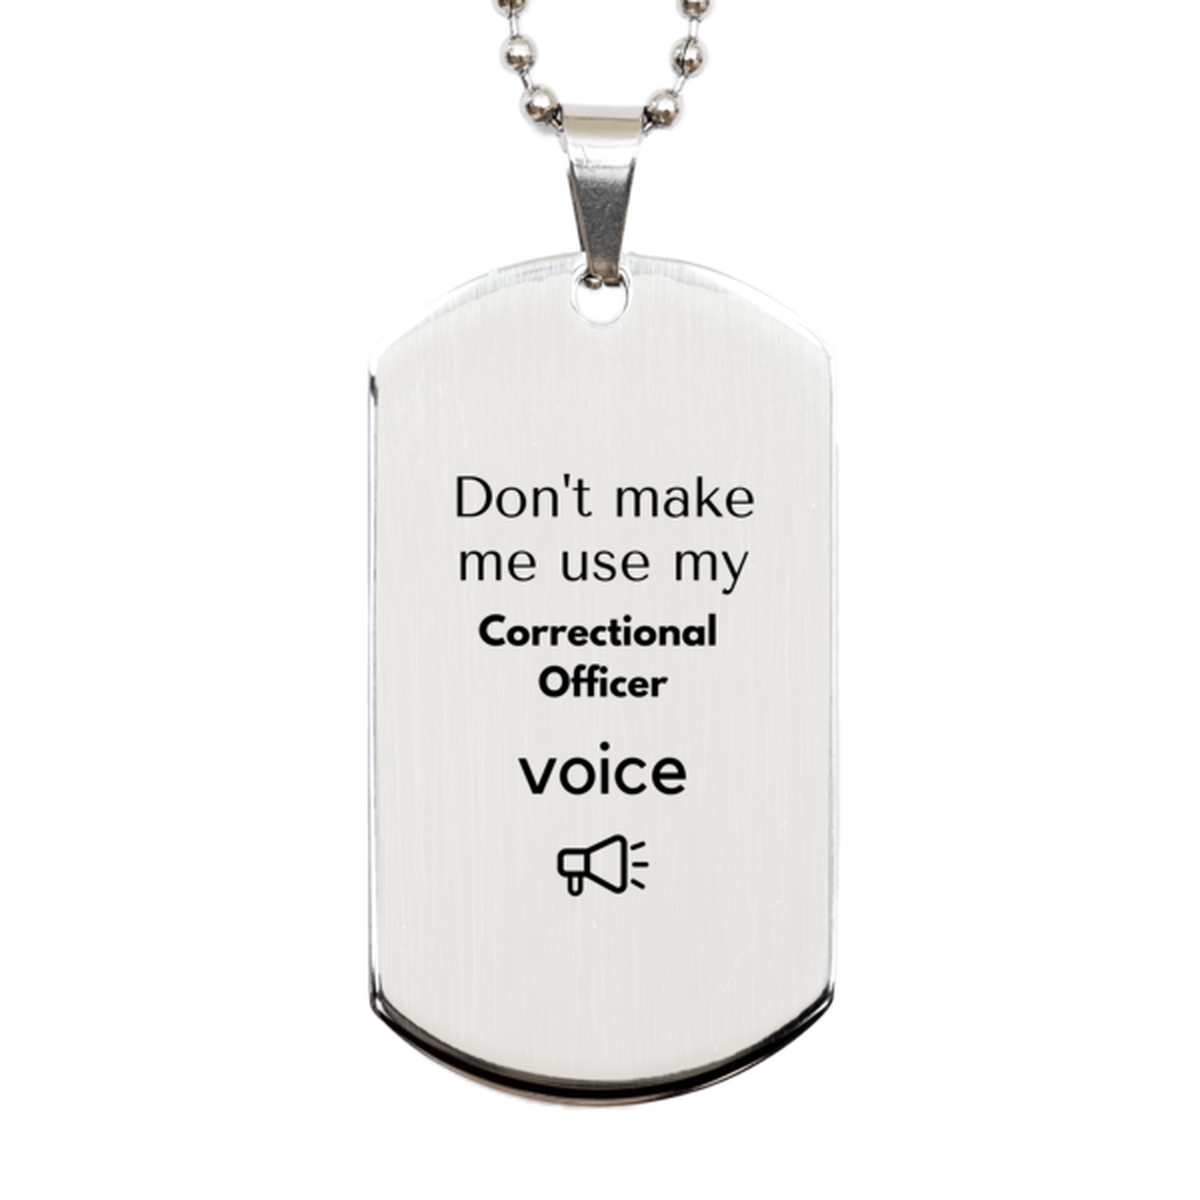 Don't make me use my Correctional Officer voice, Sarcasm Correctional Officer Gifts, Christmas Correctional Officer Silver Dog Tag Birthday Unique Gifts For Correctional Officer Coworkers, Men, Women, Colleague, Friends